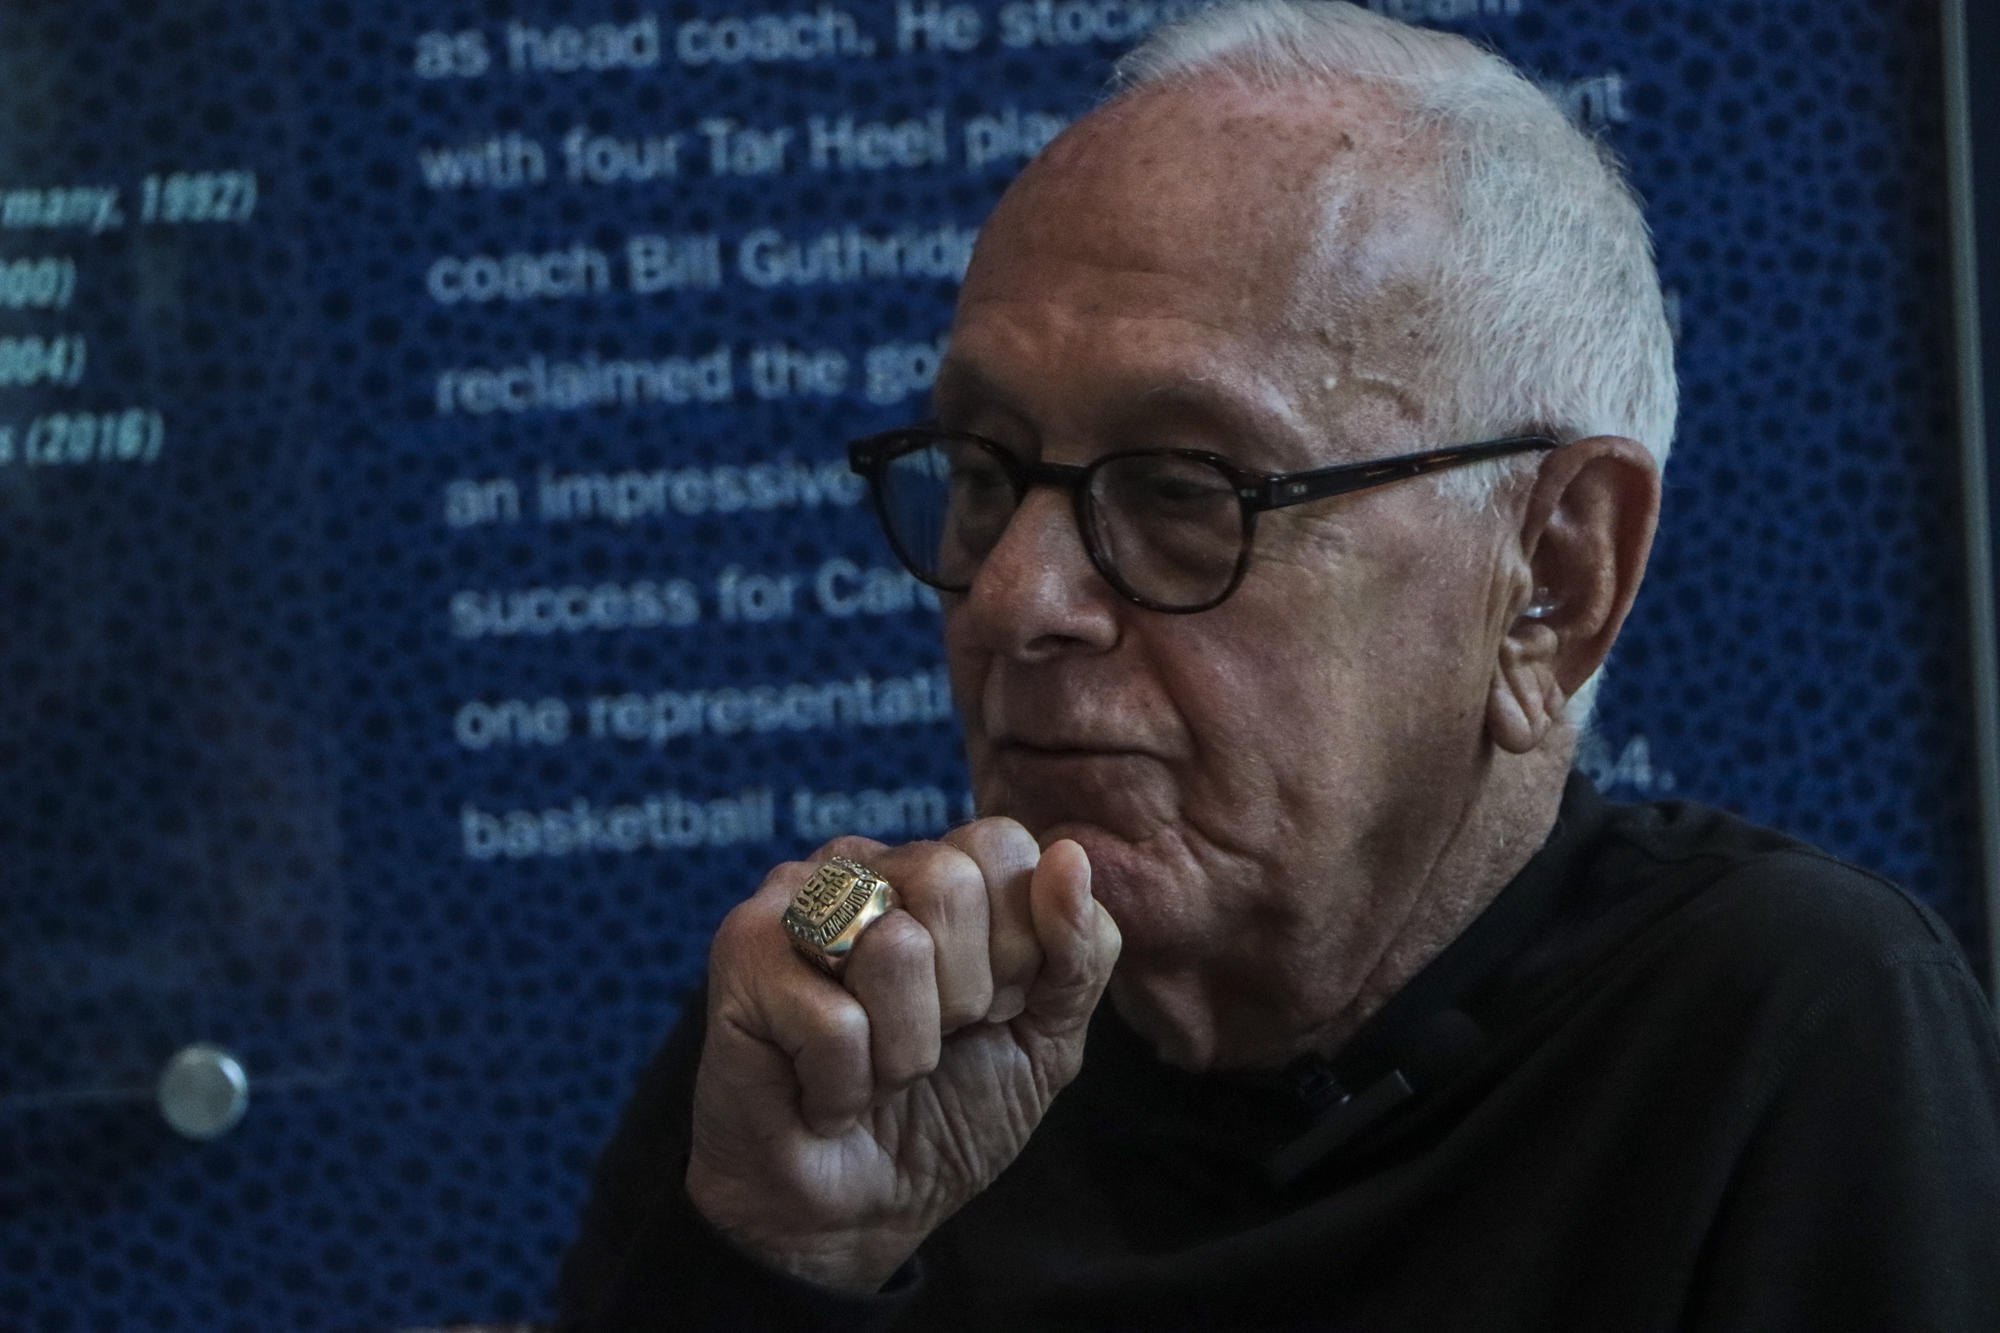 Larry Brown: From Blue to Gold